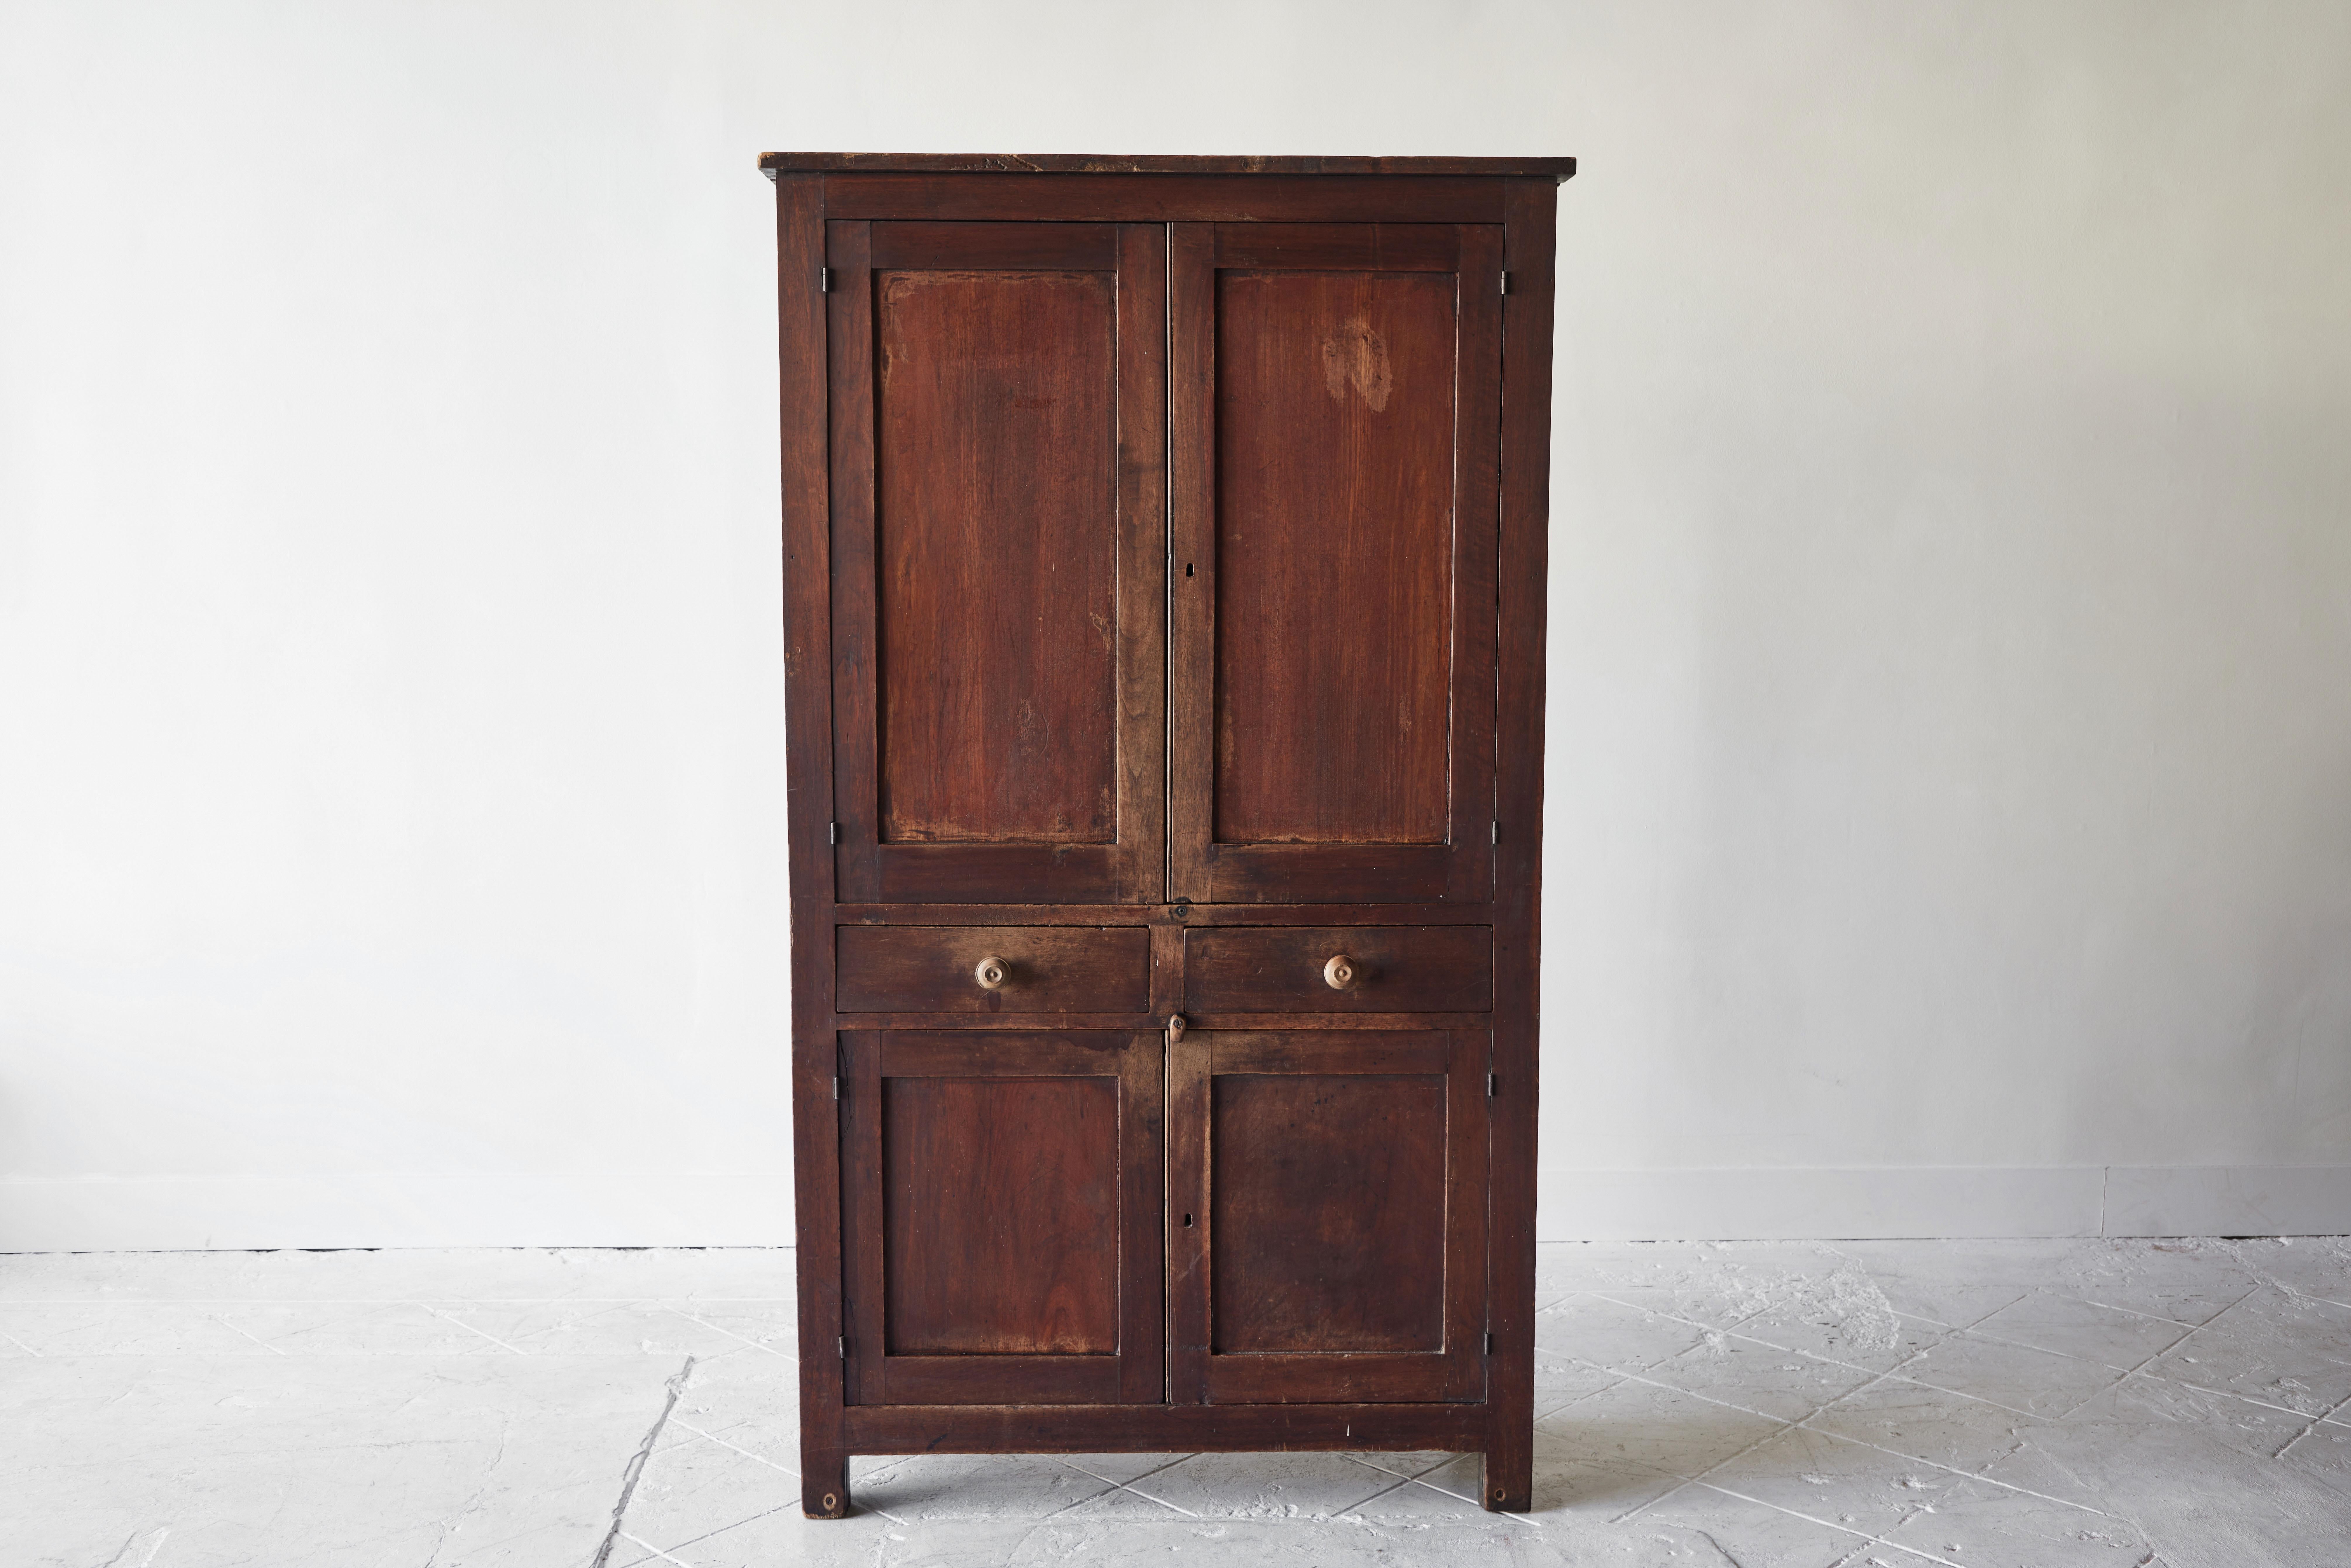 This early American walnut cupboard is a classic example of early American furniture with legs and feet that are simply downward extensions of the simplistic rectangular style. This piece can be classified as in the style of Shaker furniture with